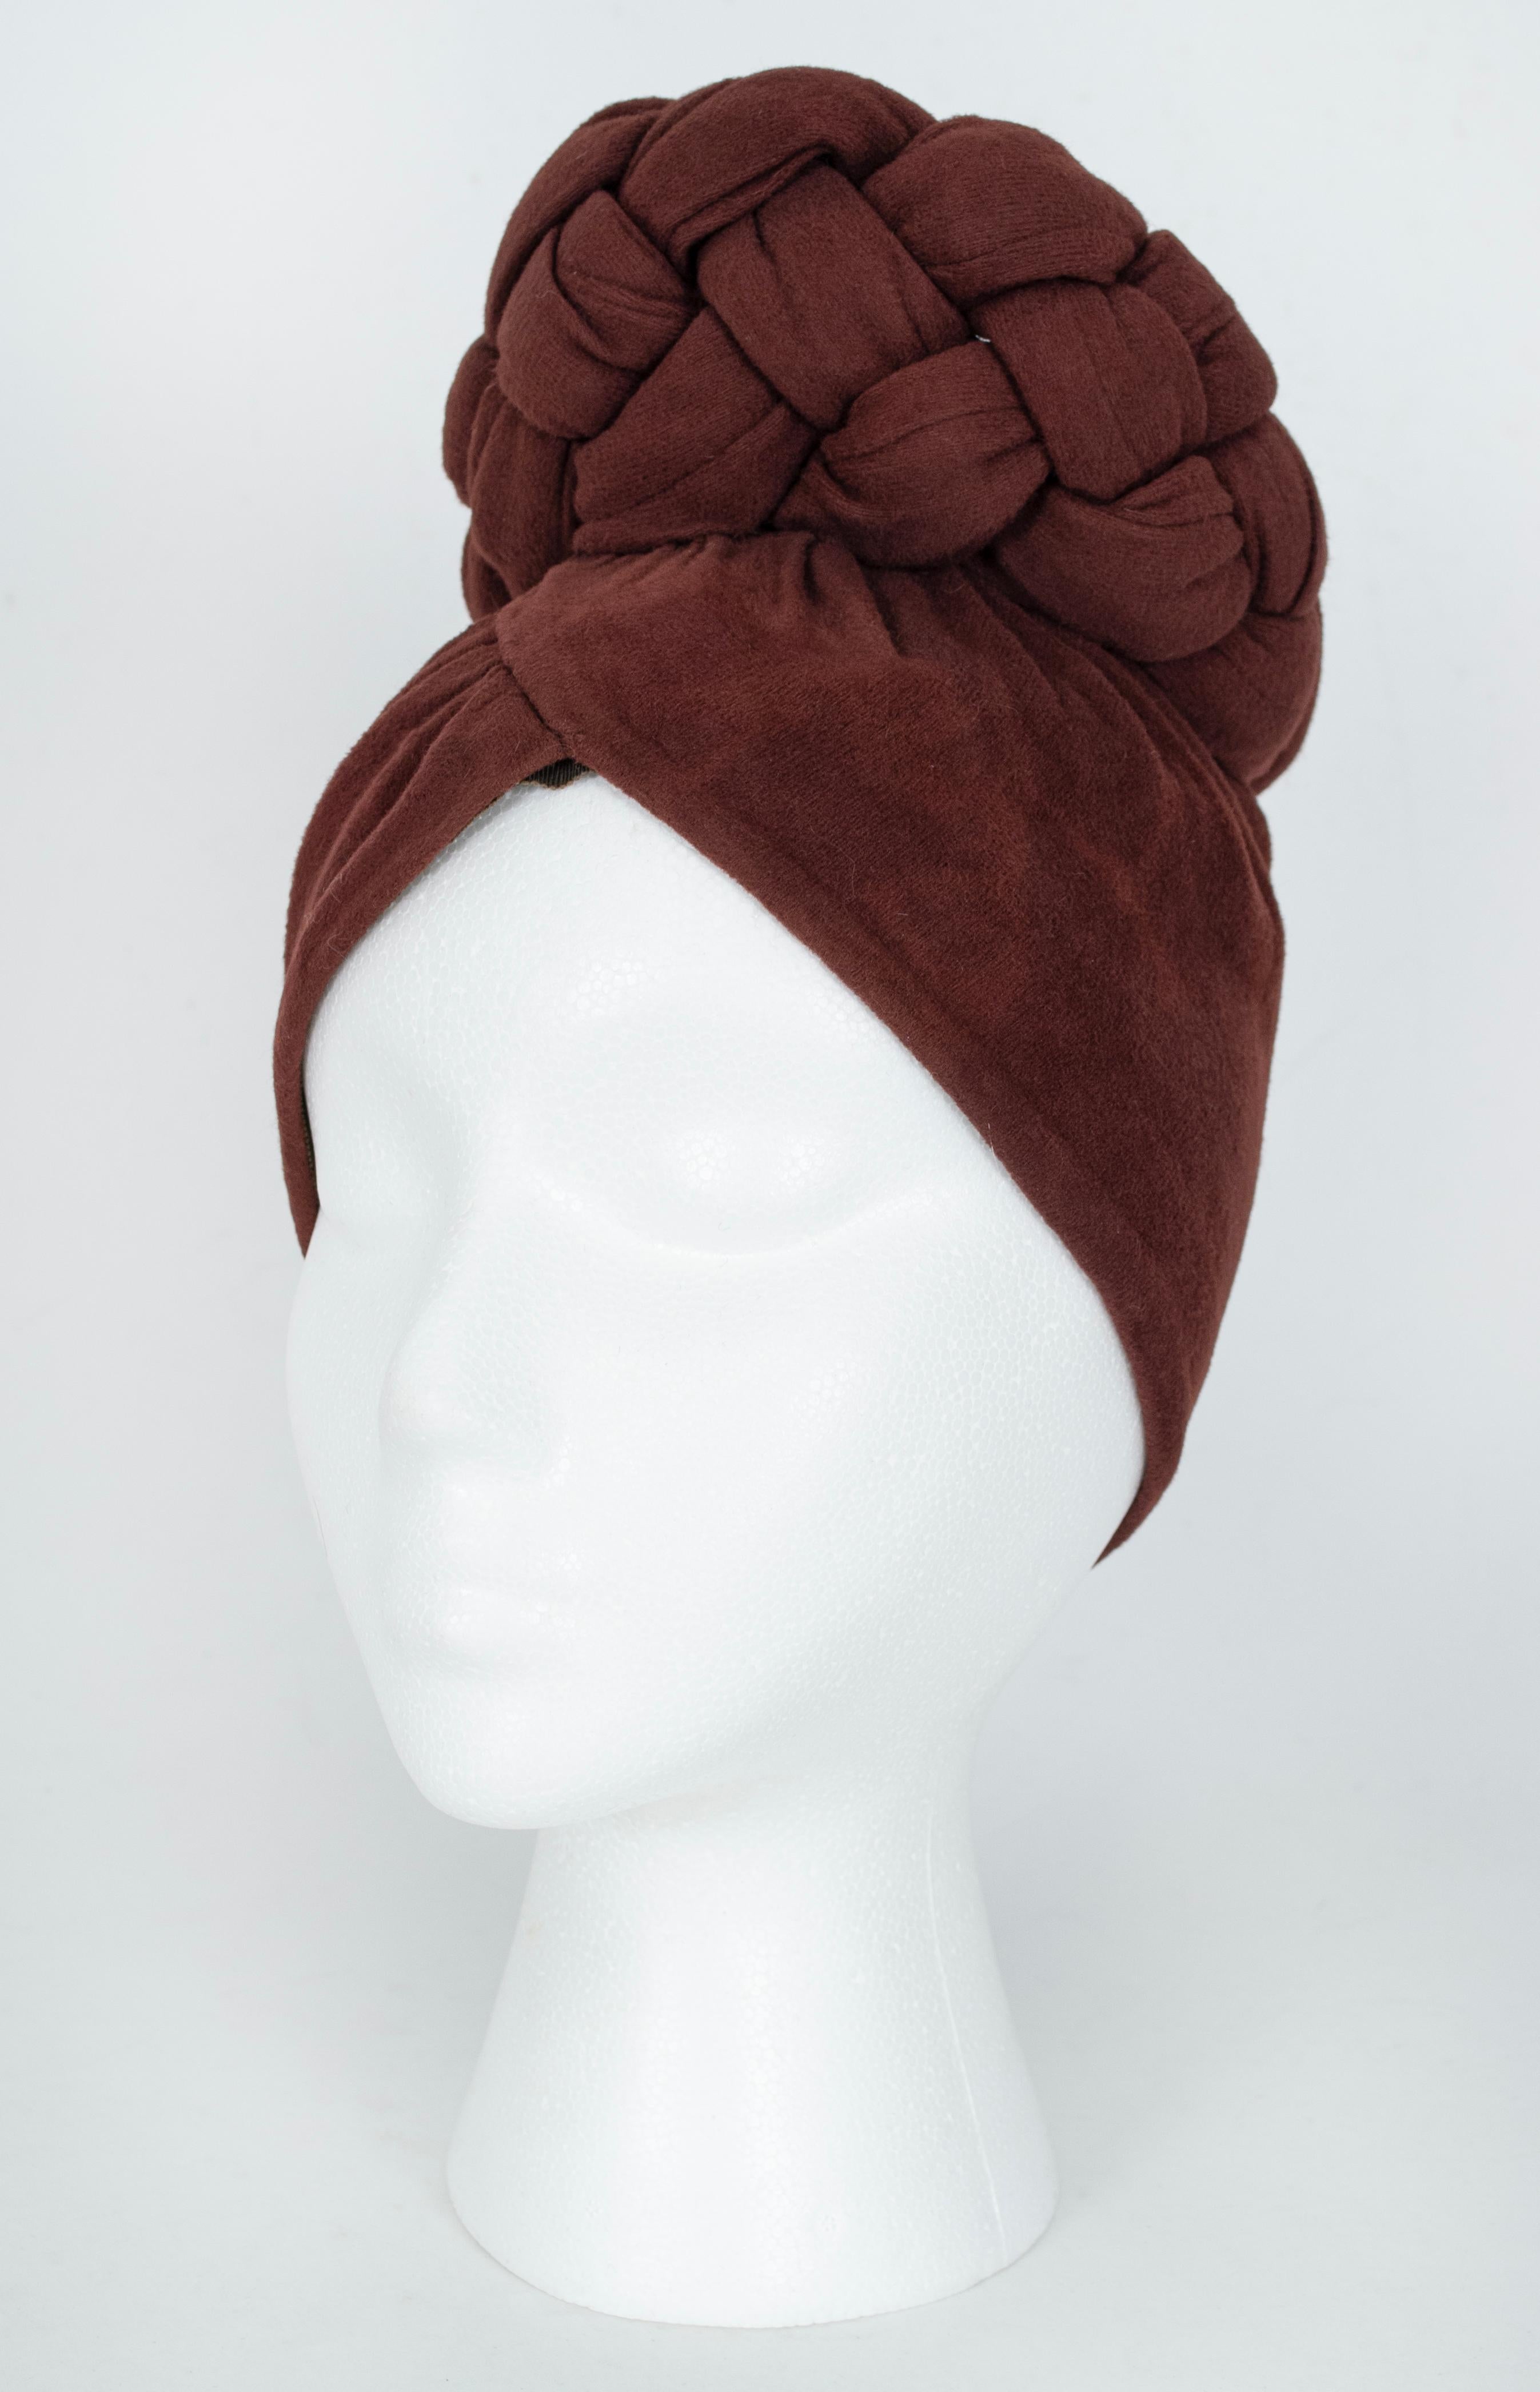 No ordinary turban, this model is a cross between Joan Crawford and Erykah Badu. It completely covers the skull, so bad hair days are conquered while drama and glamour are quite literally amplified.

Collapsible stretch fabric turban with surplice